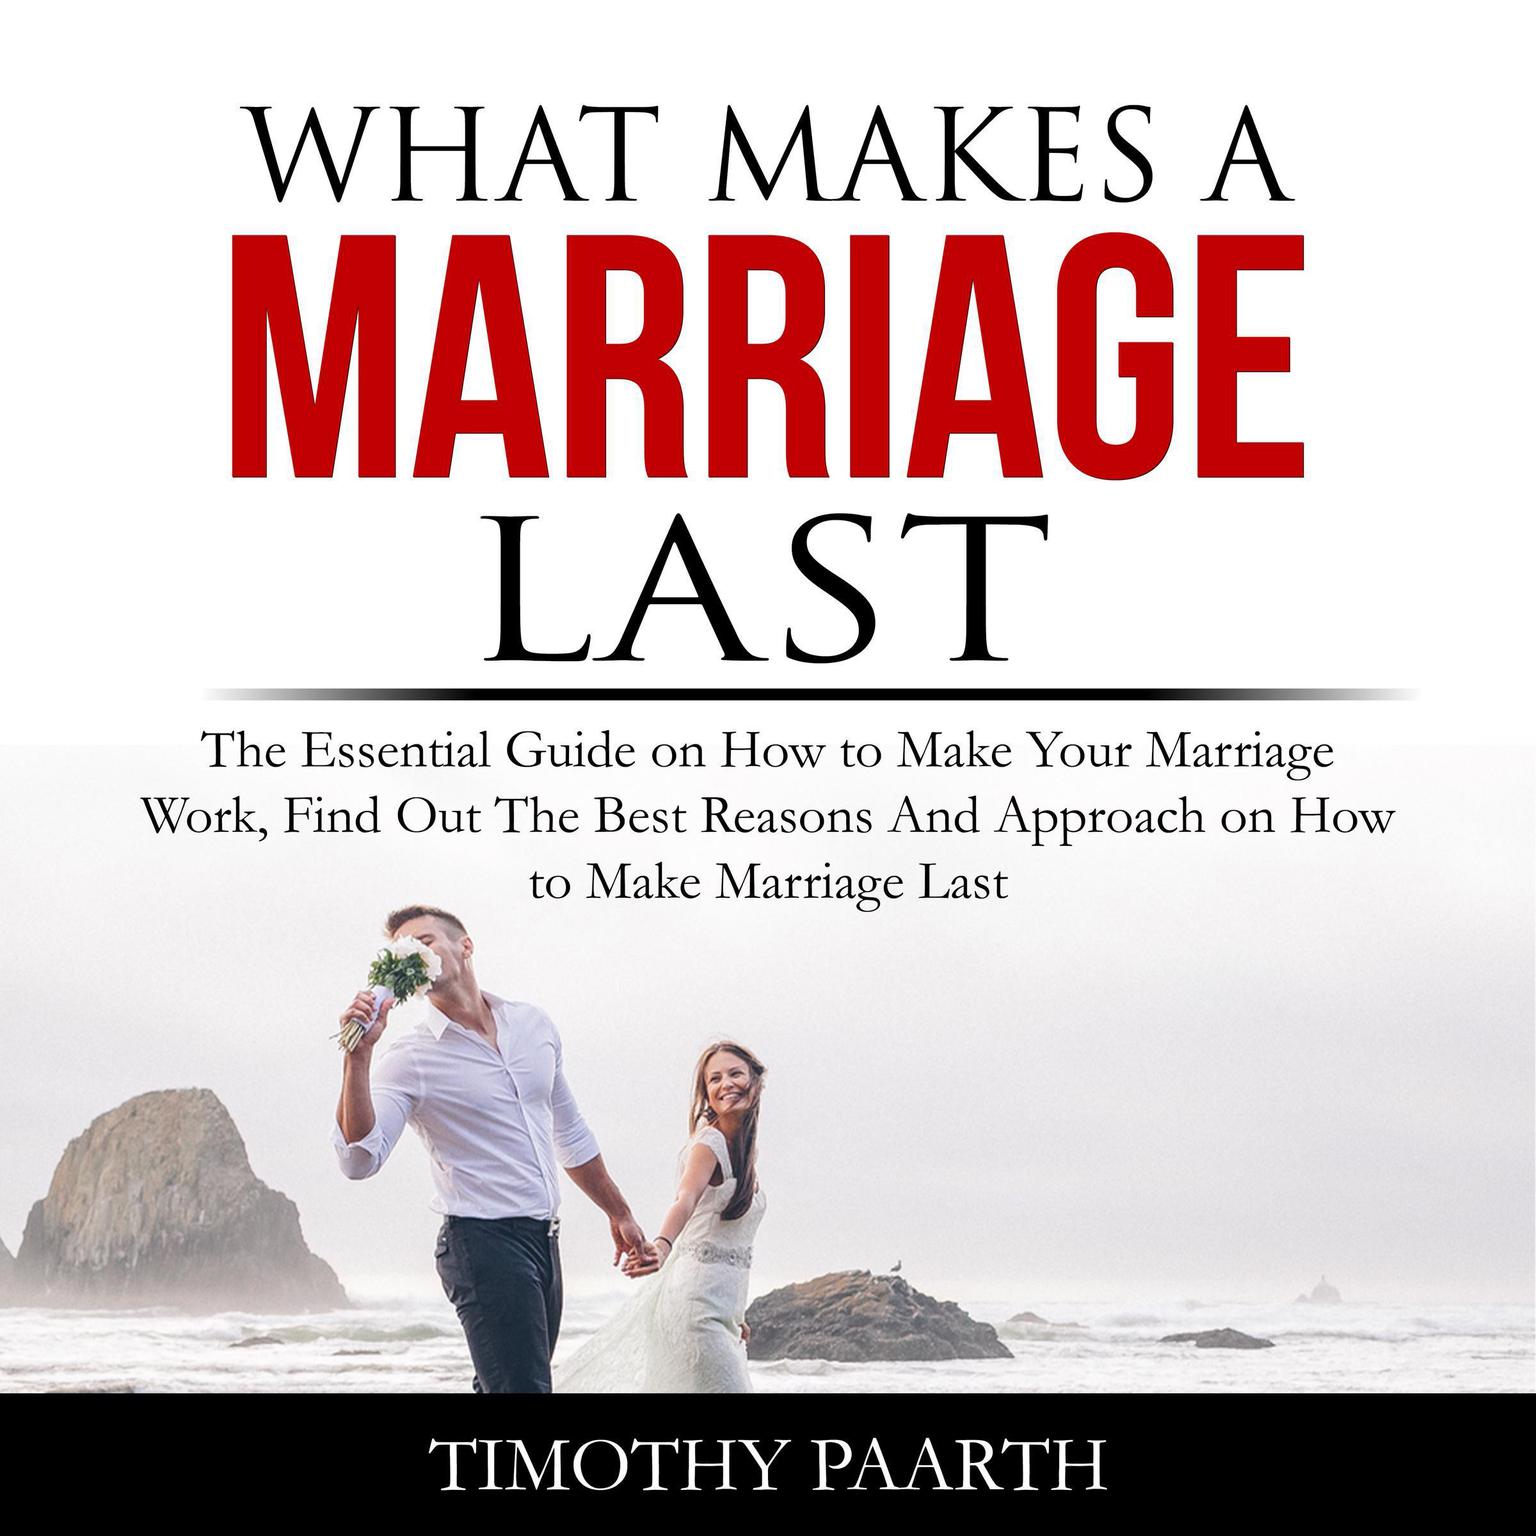 What Makes a Marriage Last: The Essential Guide on How to Make Your Marriage Work, Find Out The Best Reasons And Approach on How to Make Marriage Last Audiobook, by Timothy Paarth